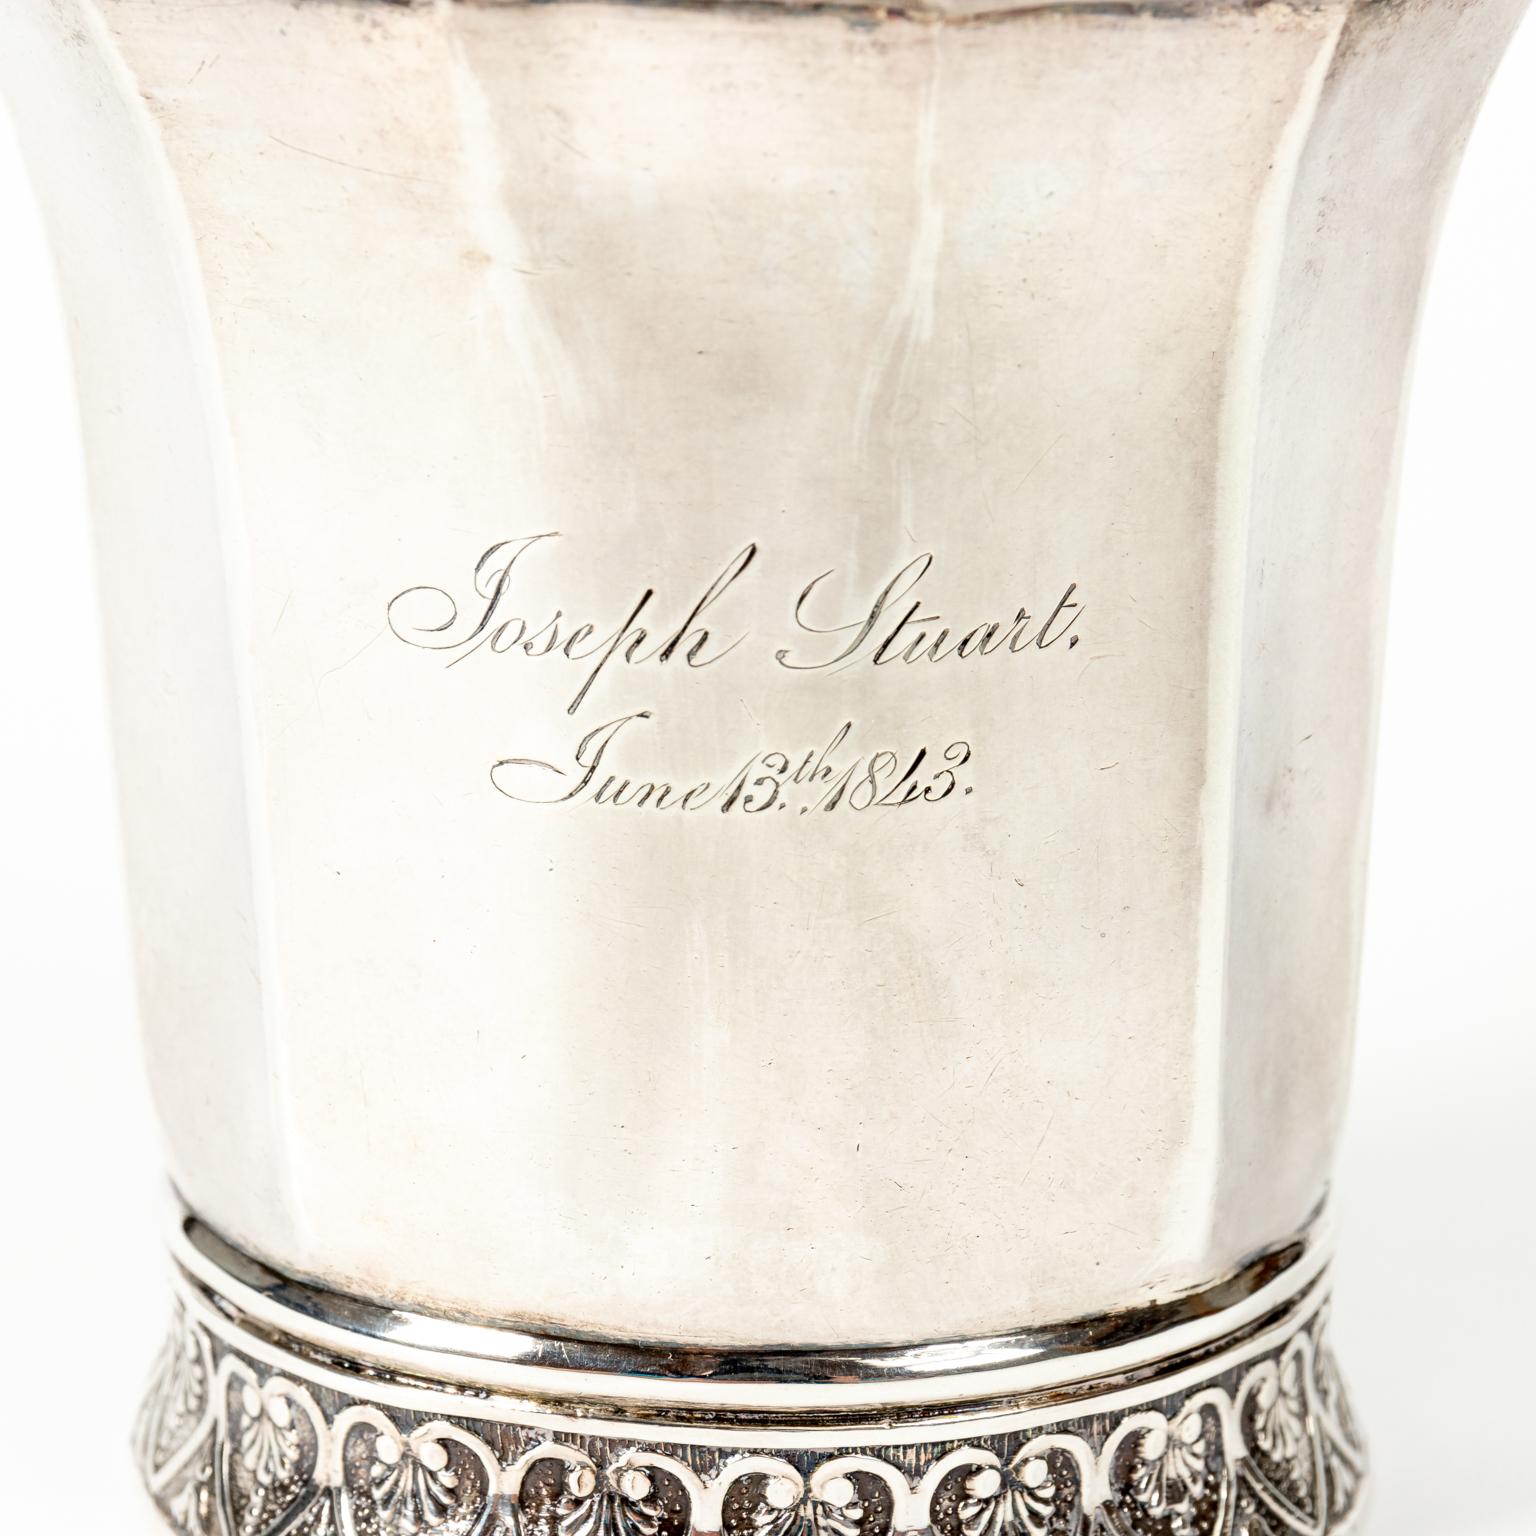 Circa mid-19th century coin silver mug with s-scroll shaped handle, engraved with the name Joseph Stuart and the date June 13th 1843. This early coin silver mug was tested, not marked. The bottom of the cup is also decorated with reliefs of heart